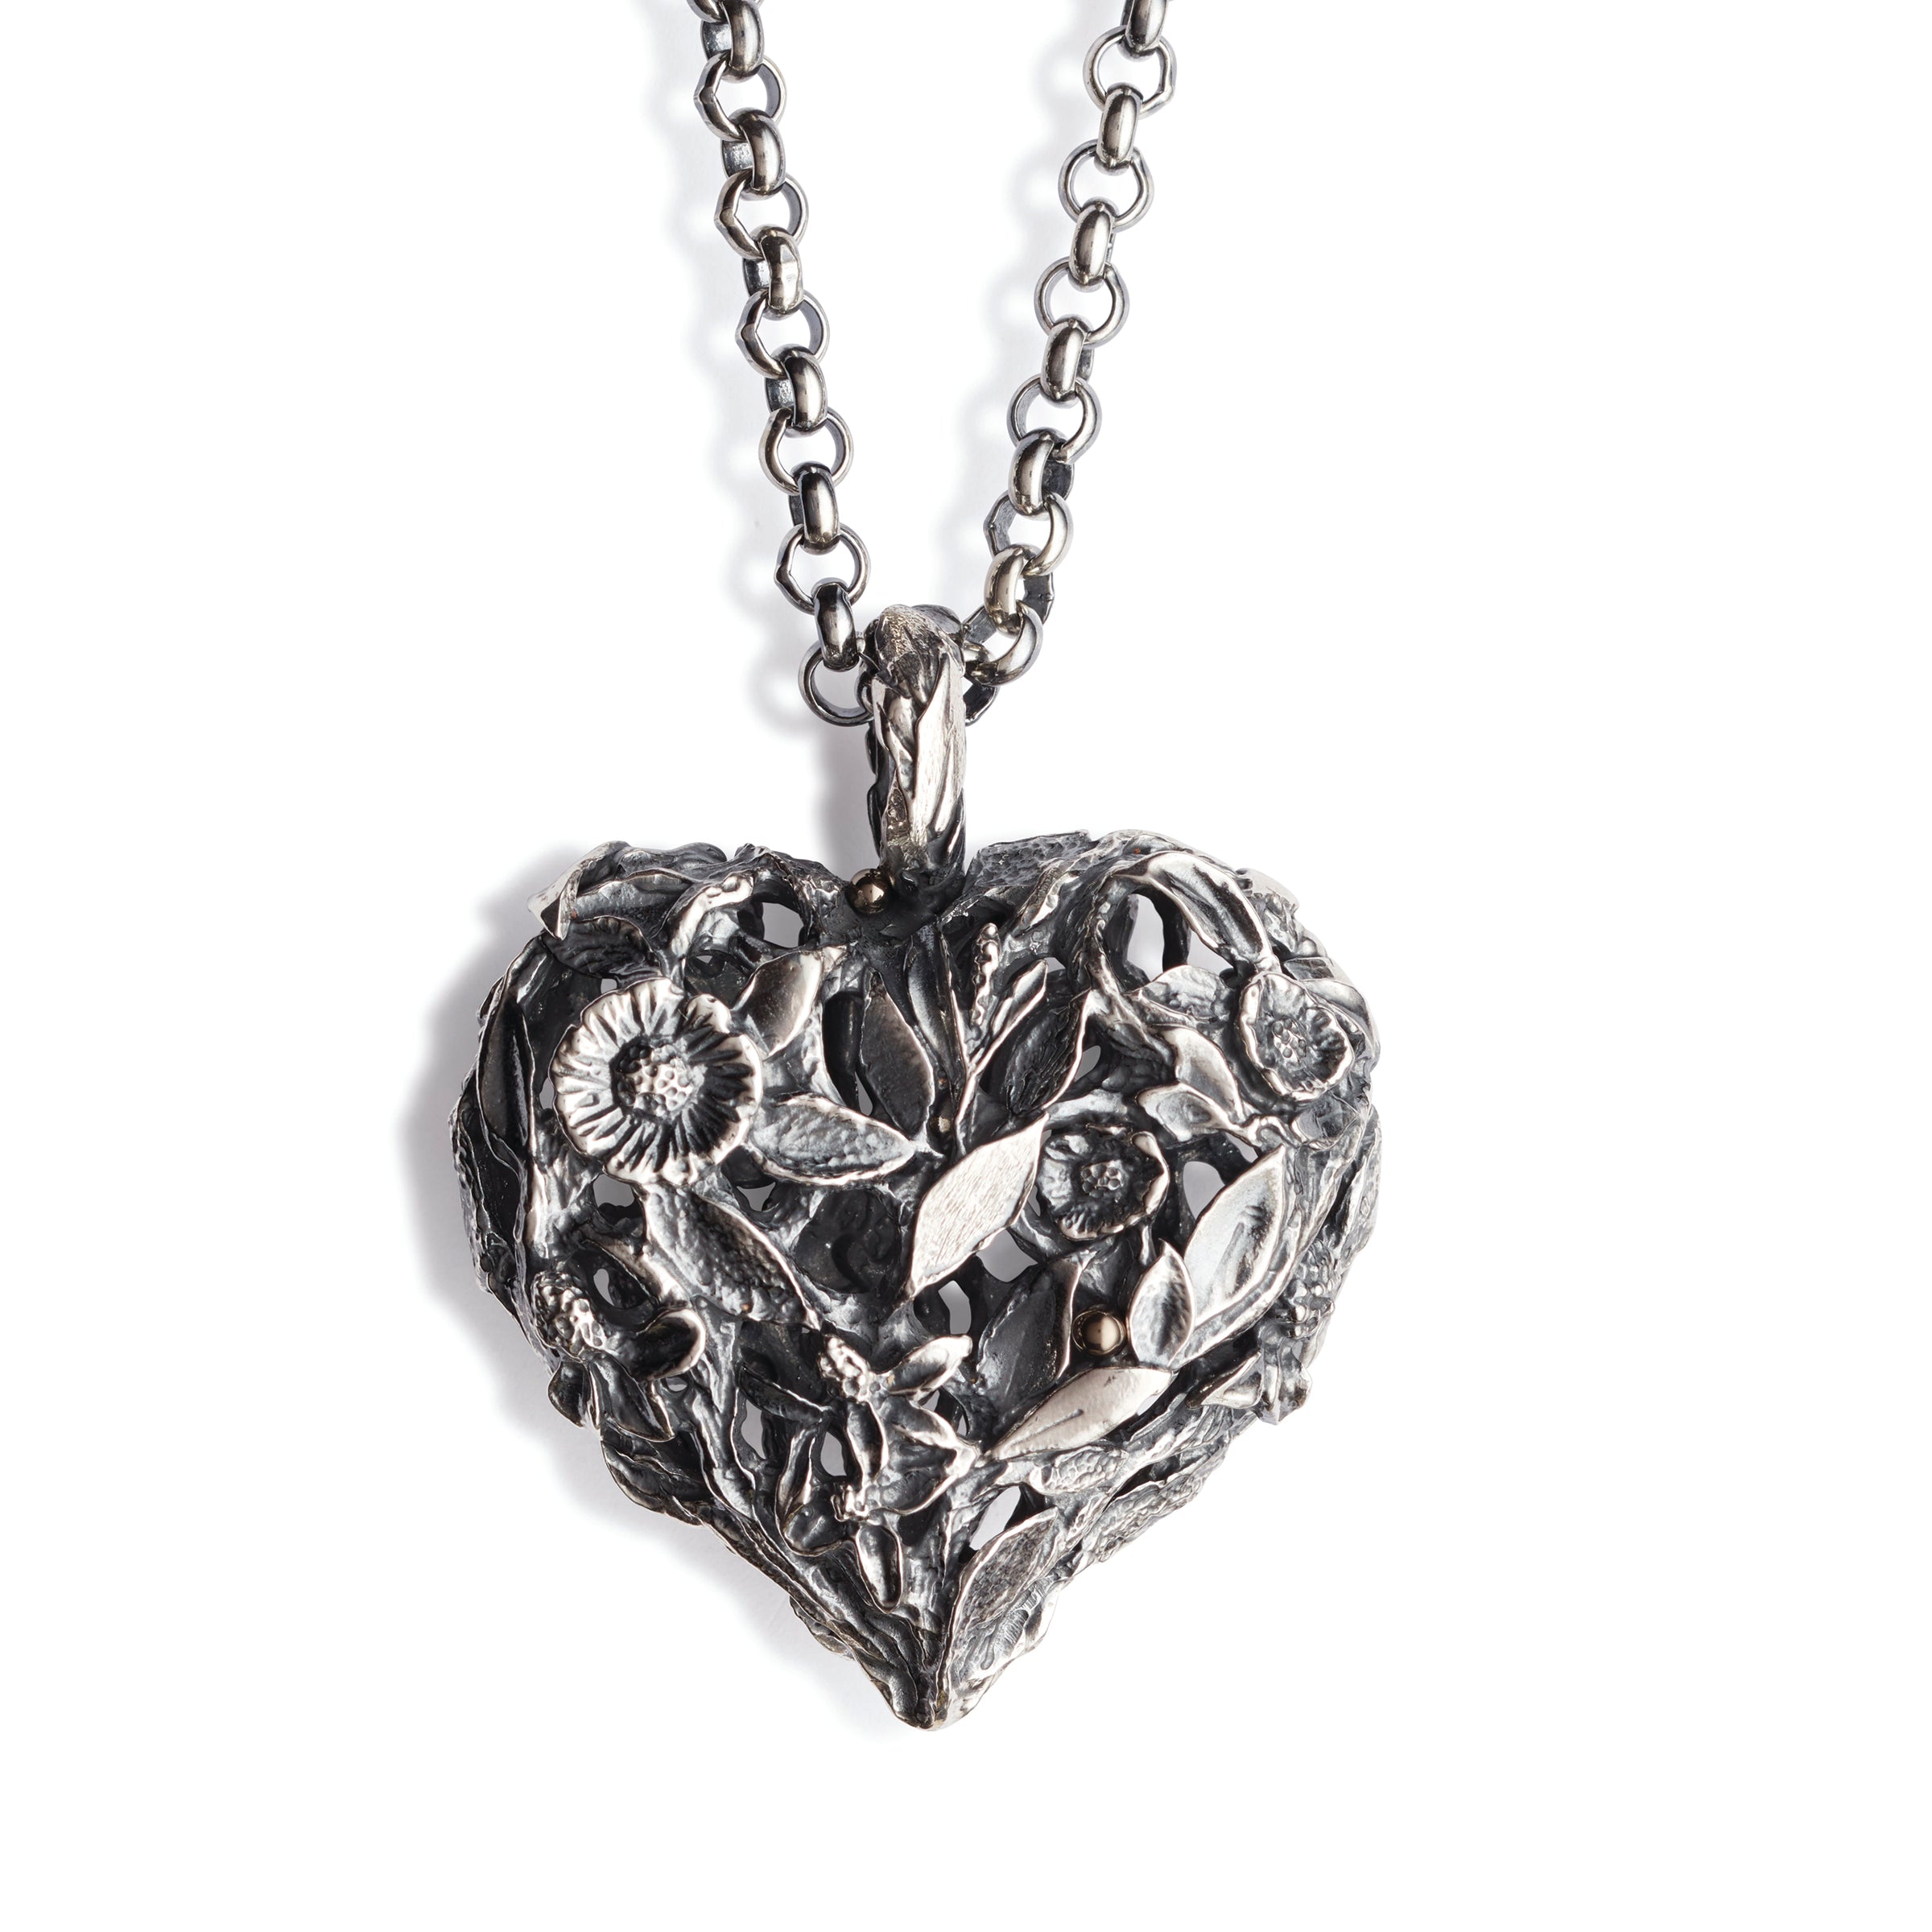 Red clover heart necklace in oxidized silver